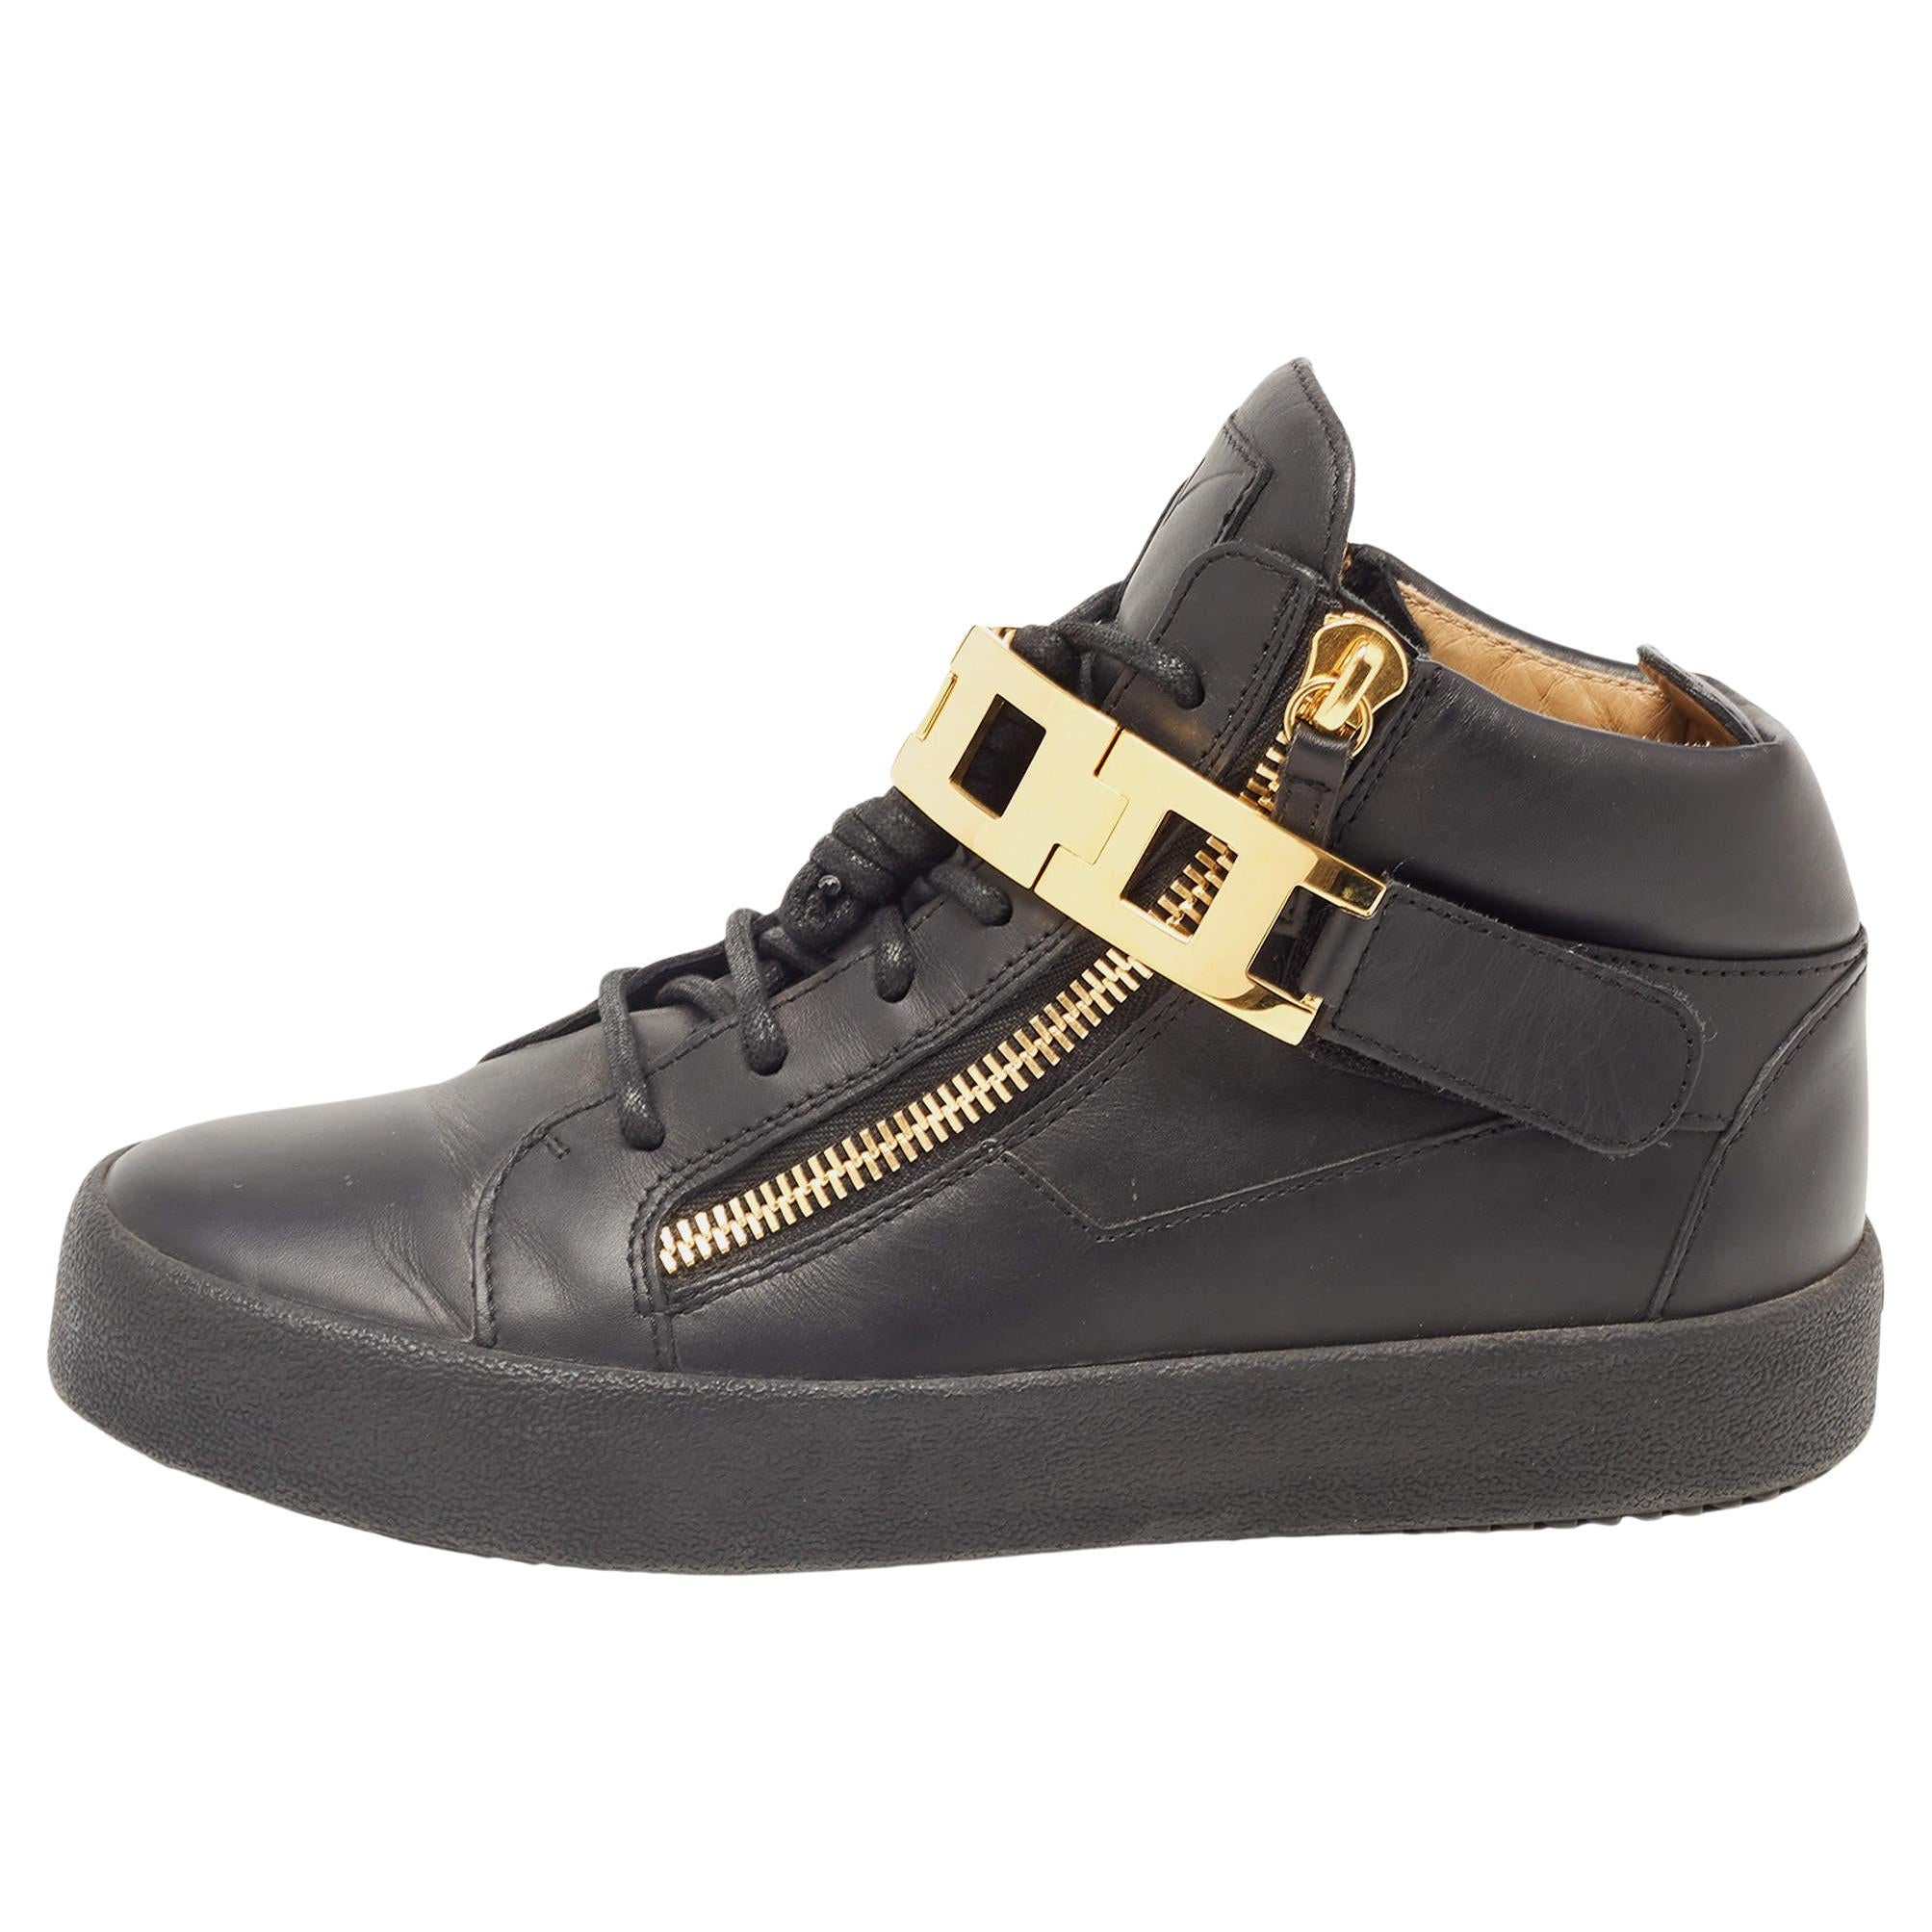 Giuseppe Zanotti Black Leather High Top Sneakers Size 40 For Sale